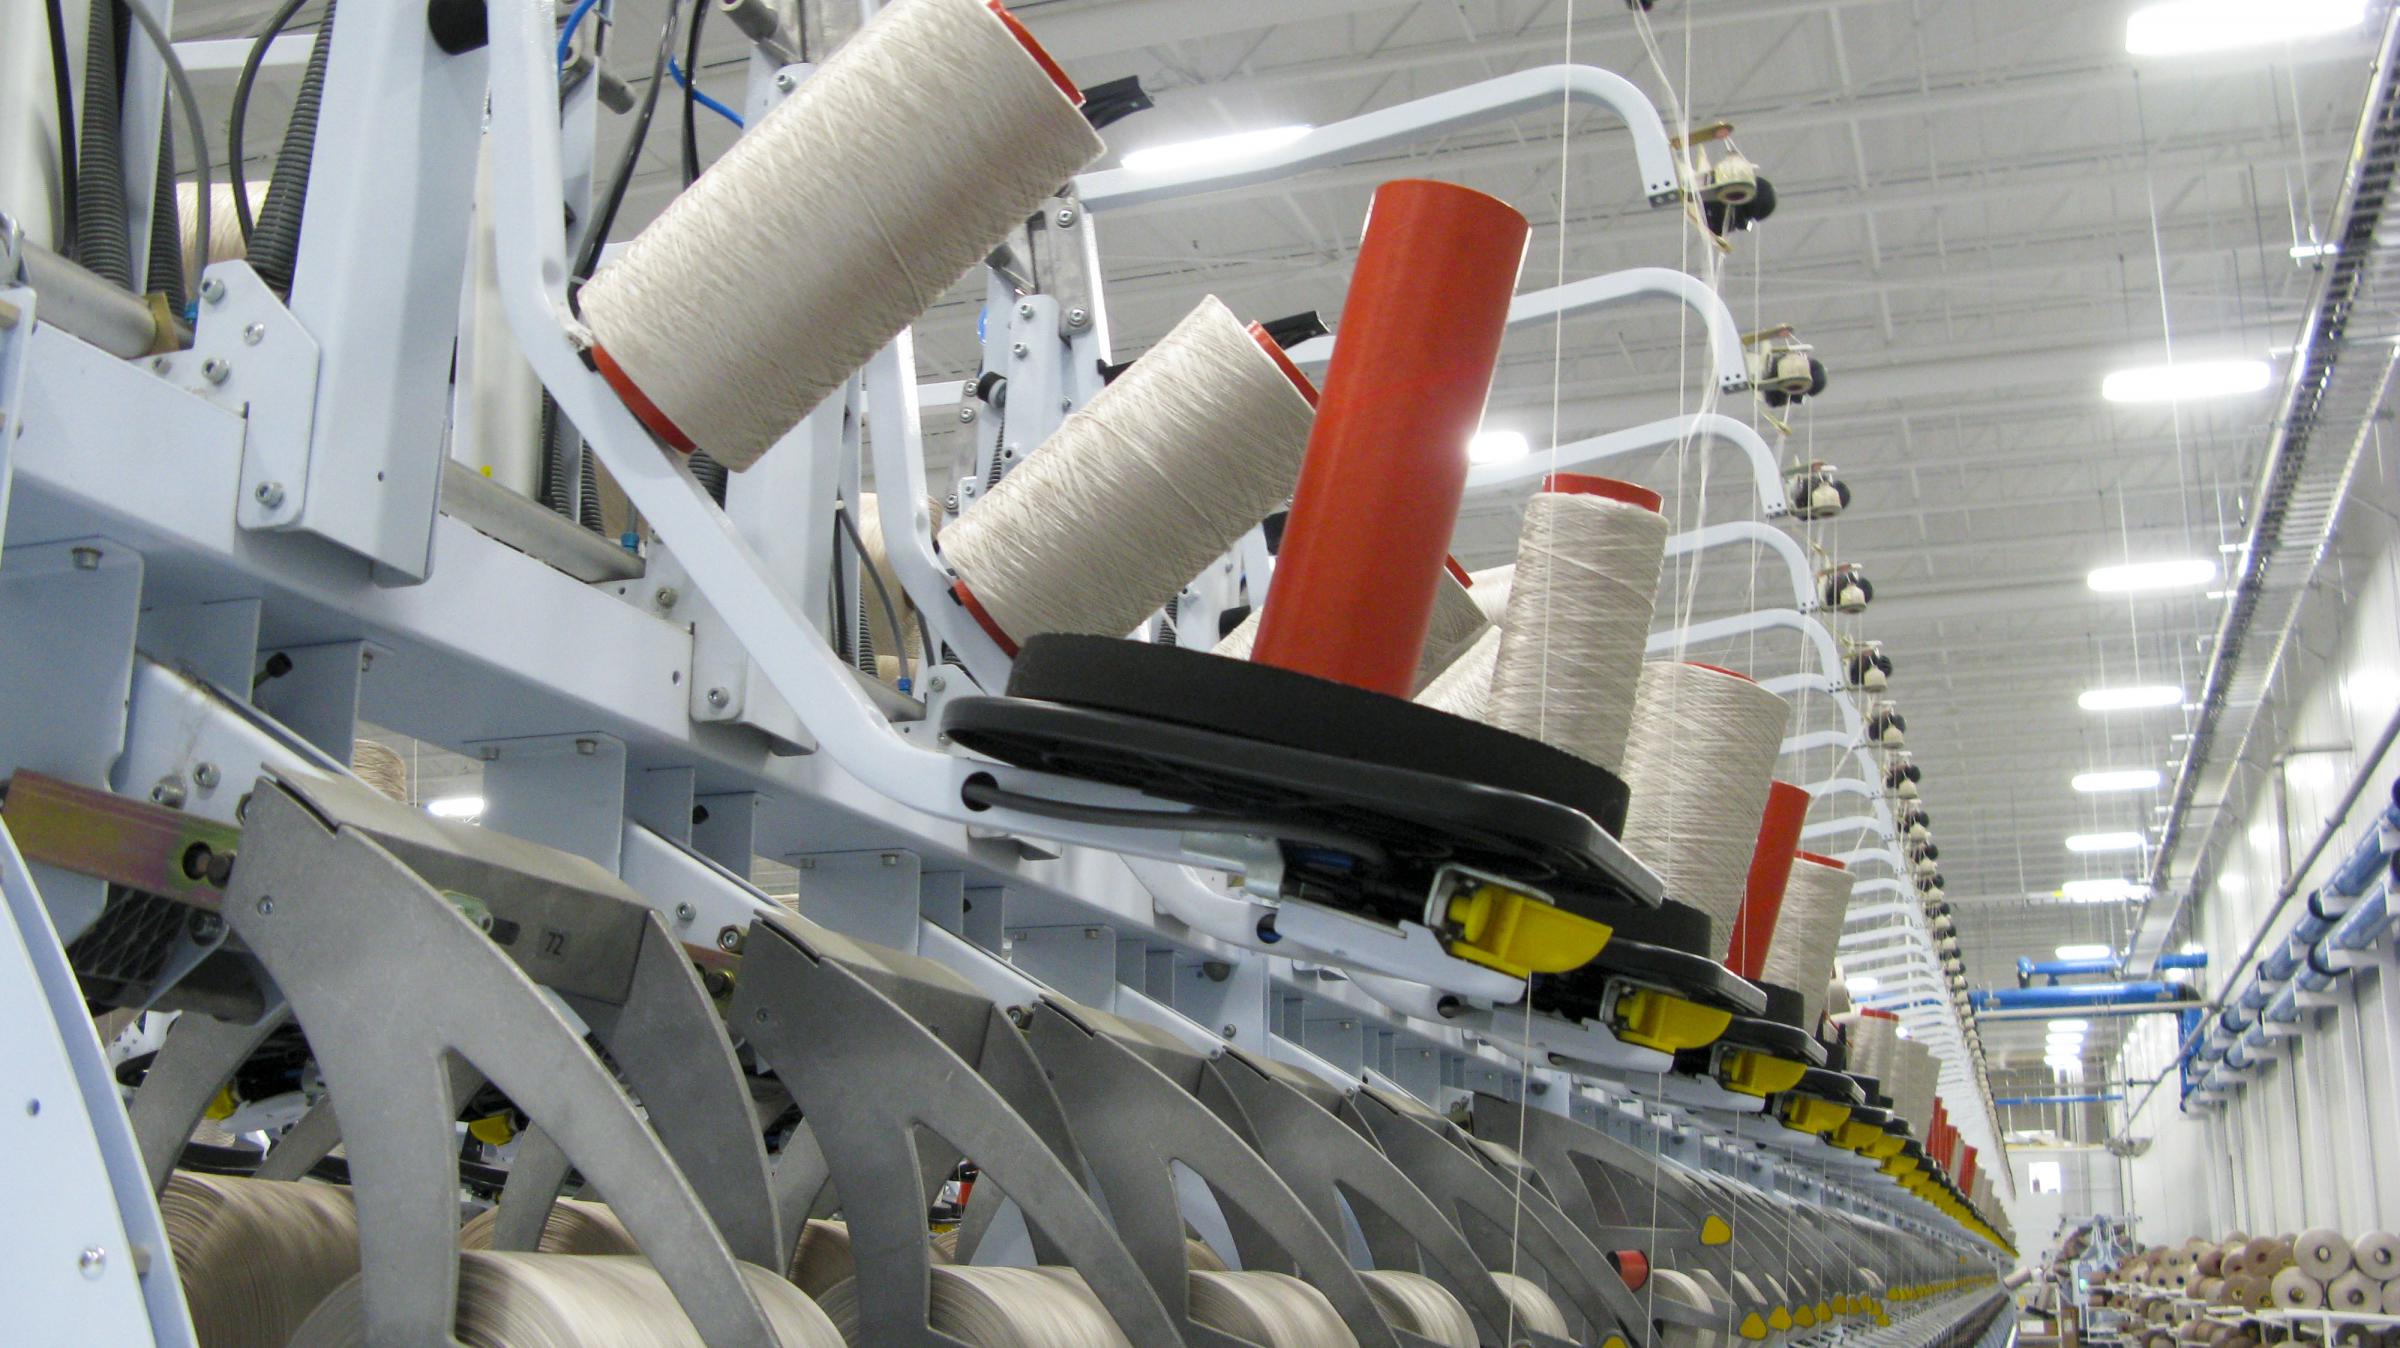 New Carpet Factories Help Cushion Blows From Recession Losses